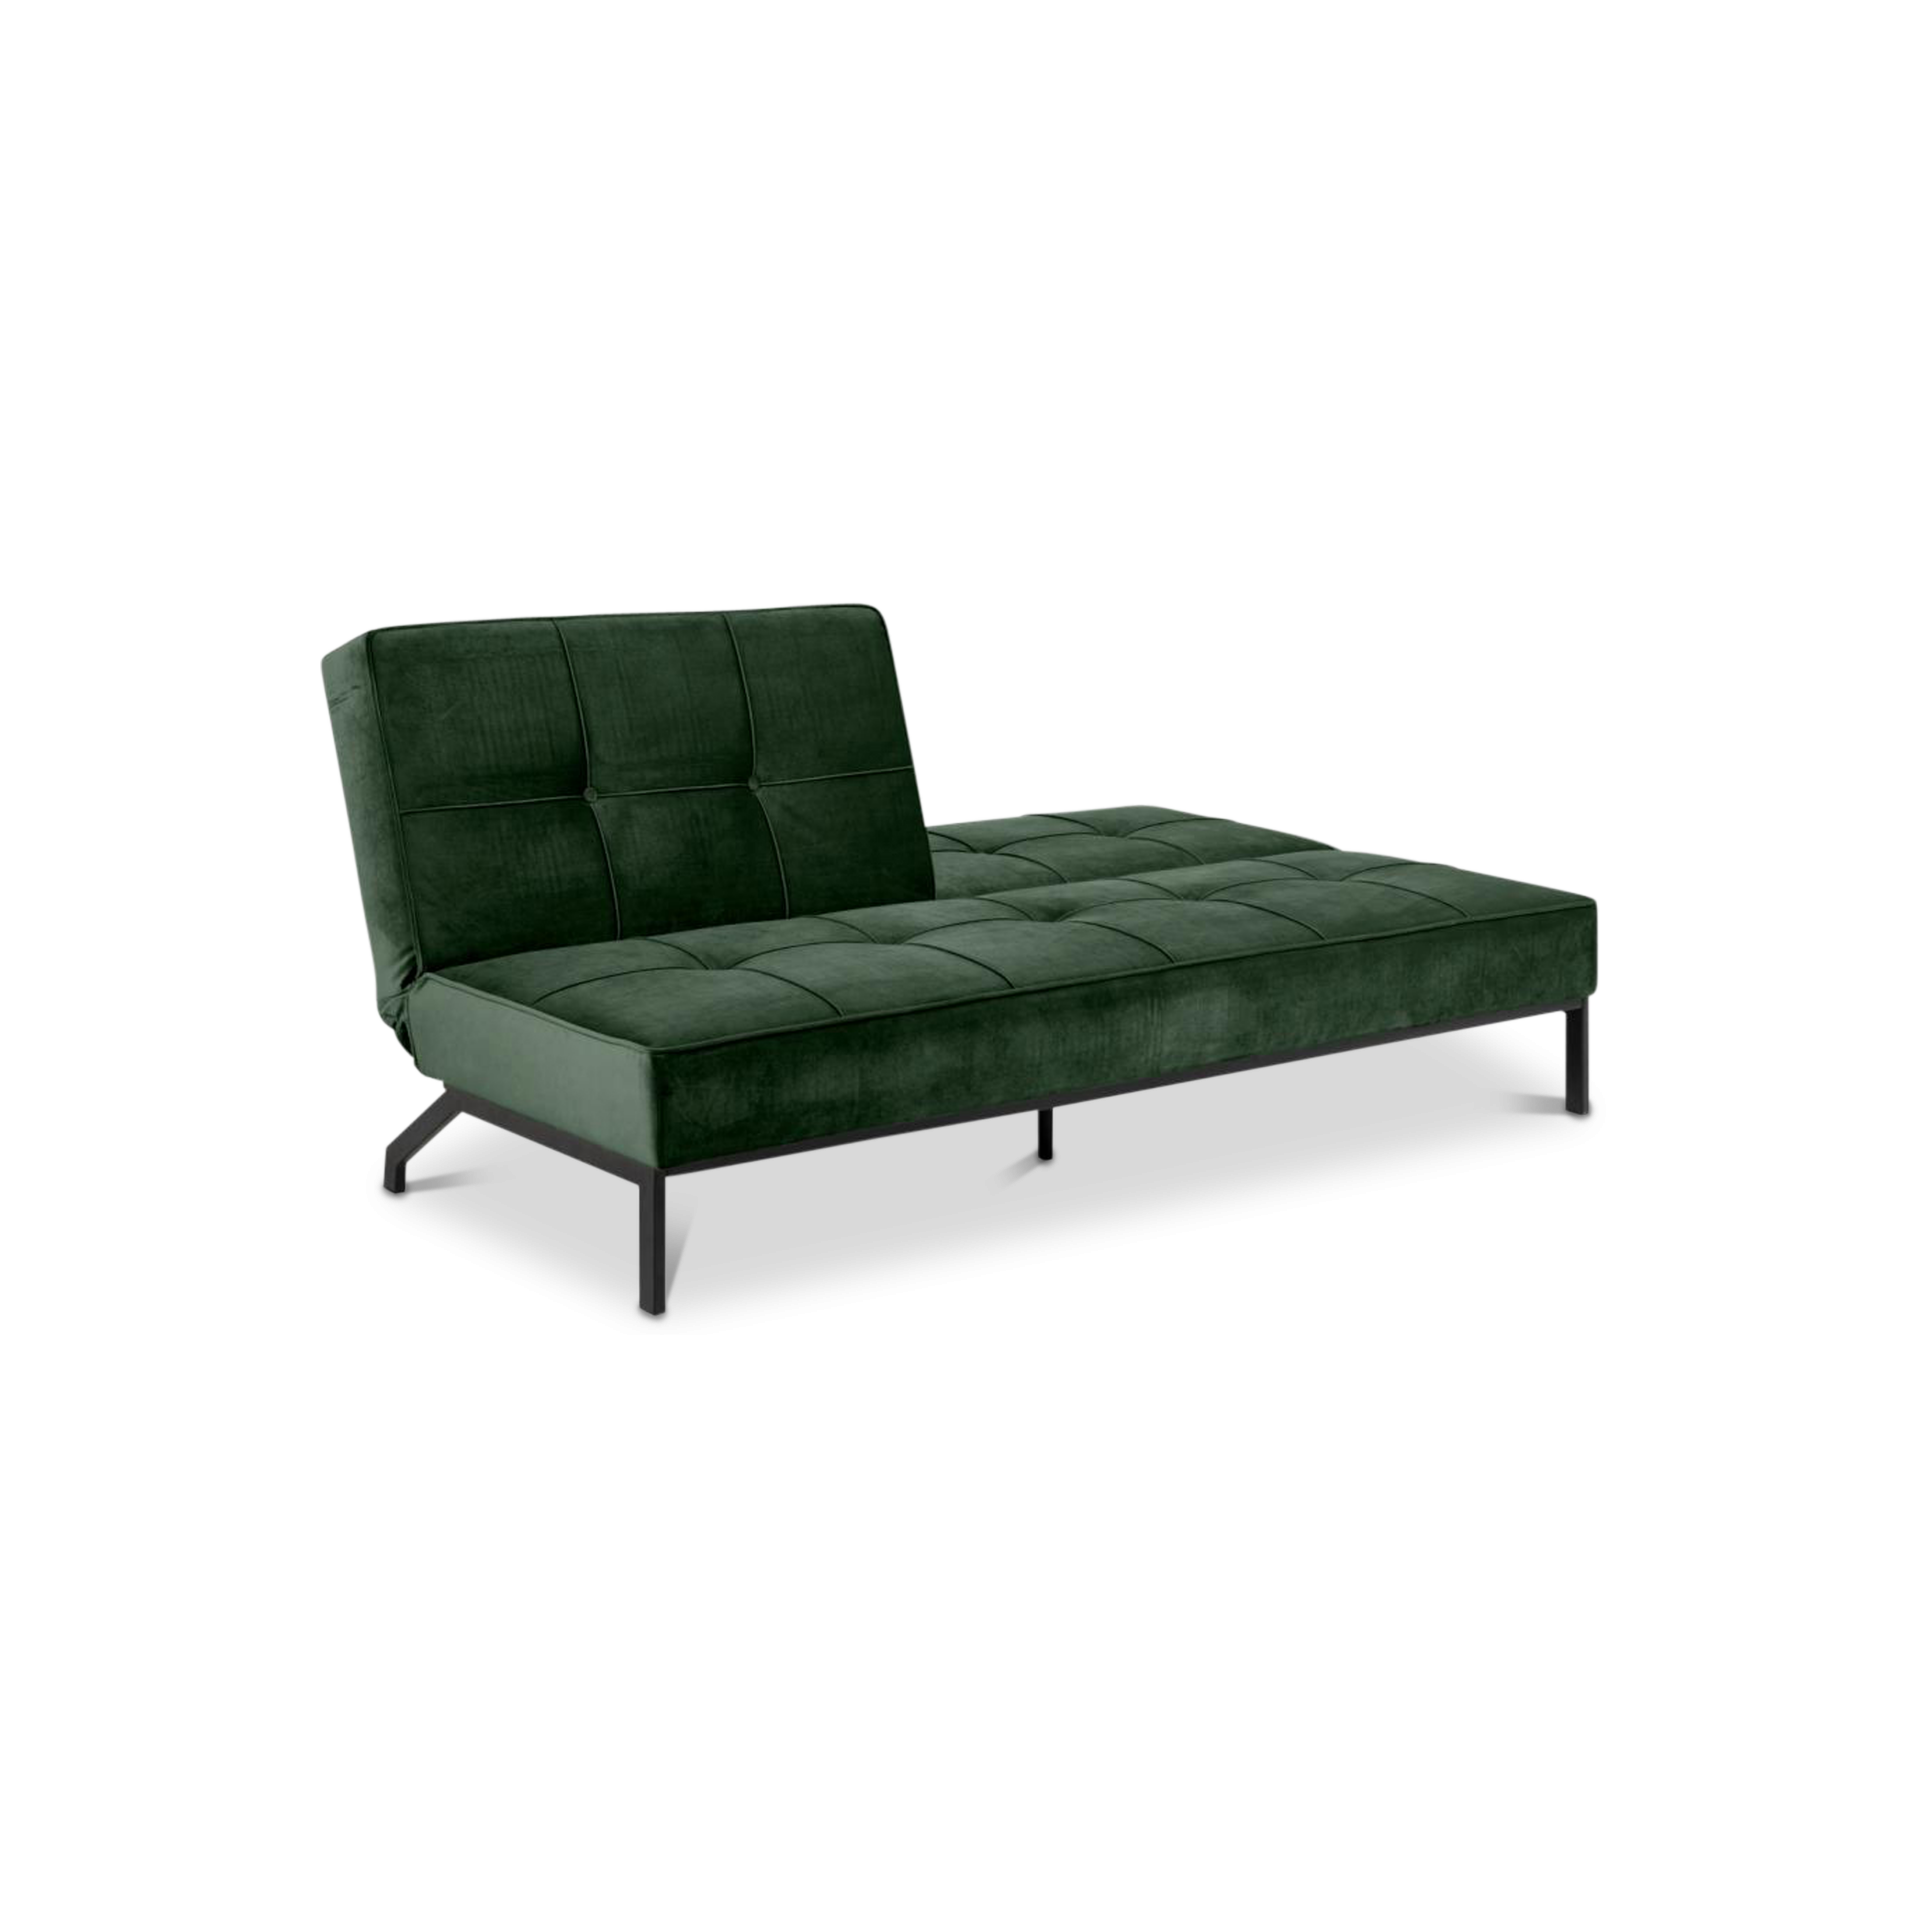 Sofabed ISTERIA VIC fabric forest green 68AC